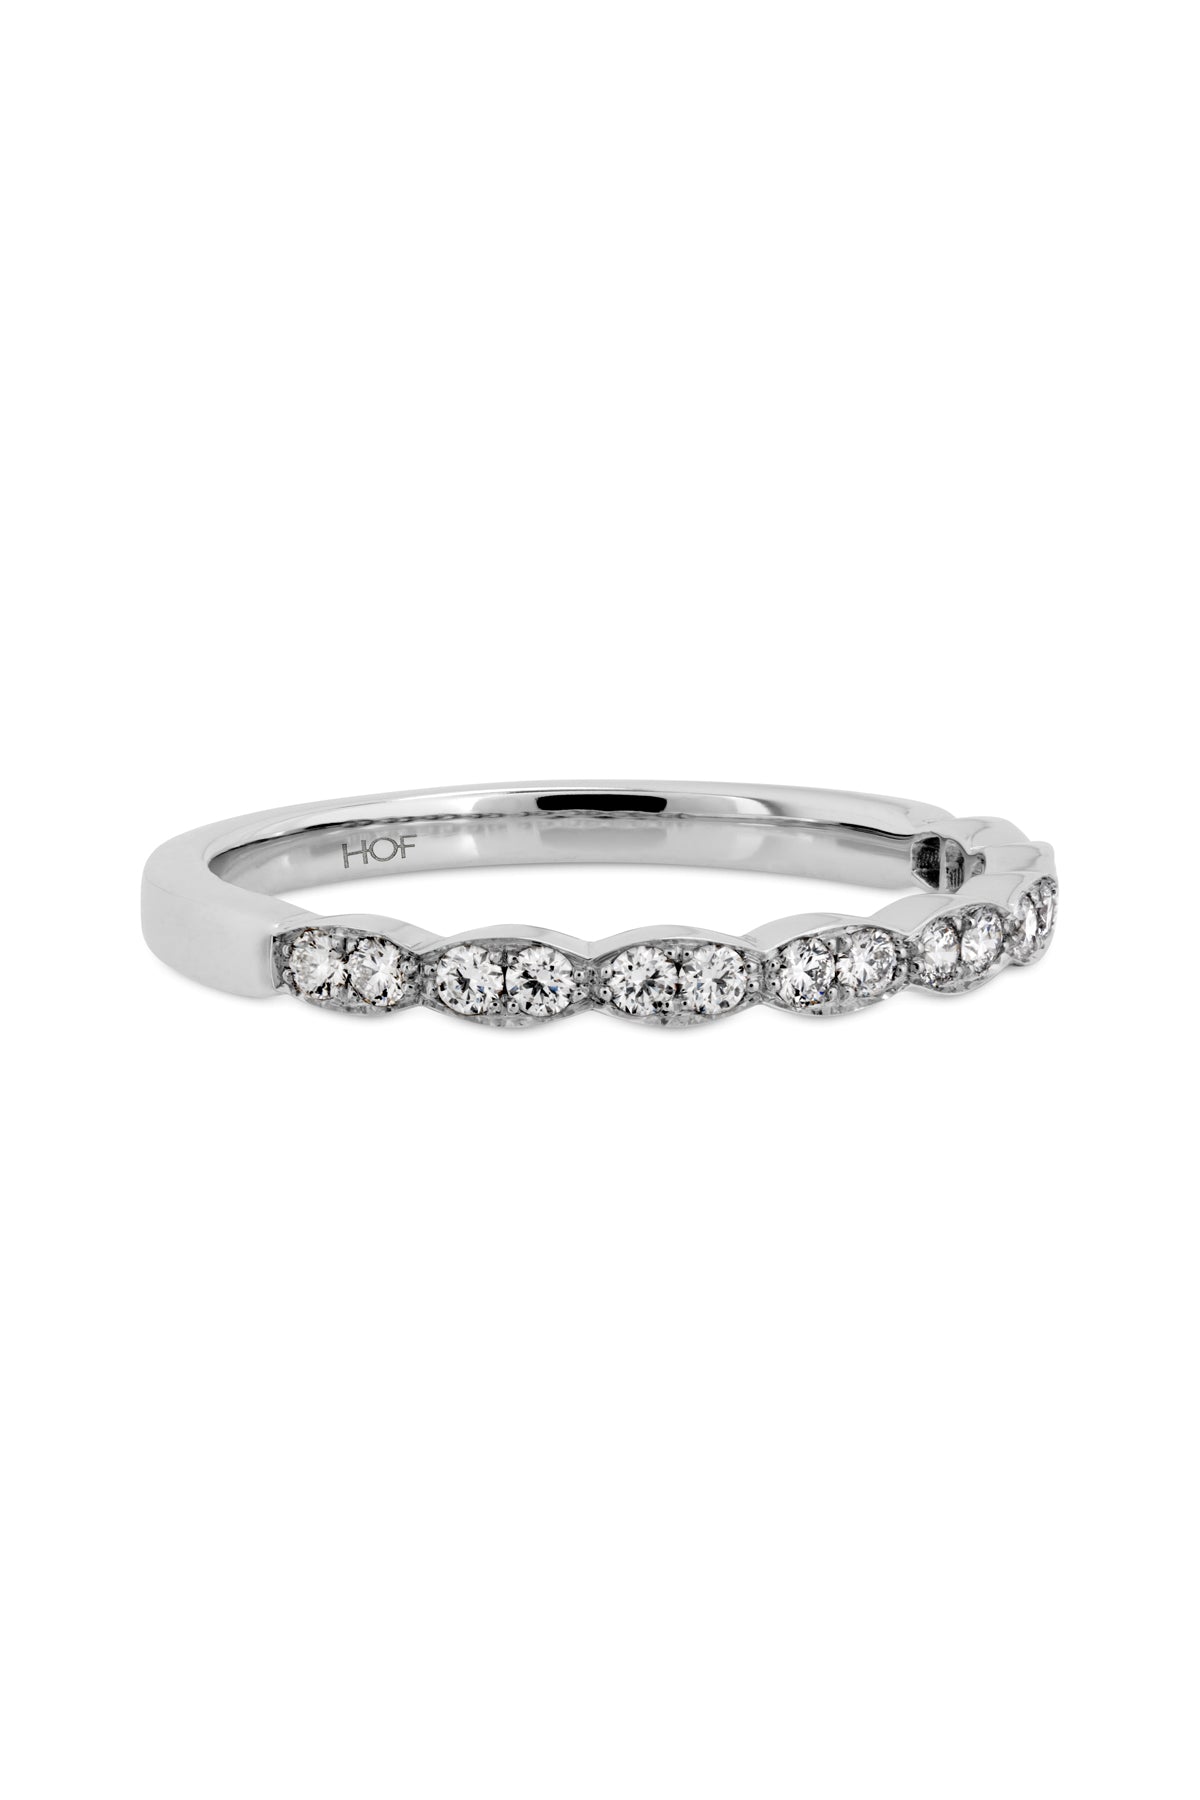 Lorelei Floral Diamond Band From Hearts On Fire available at LeGassick Diamonds and Jewellery Gold Coast, Australia.